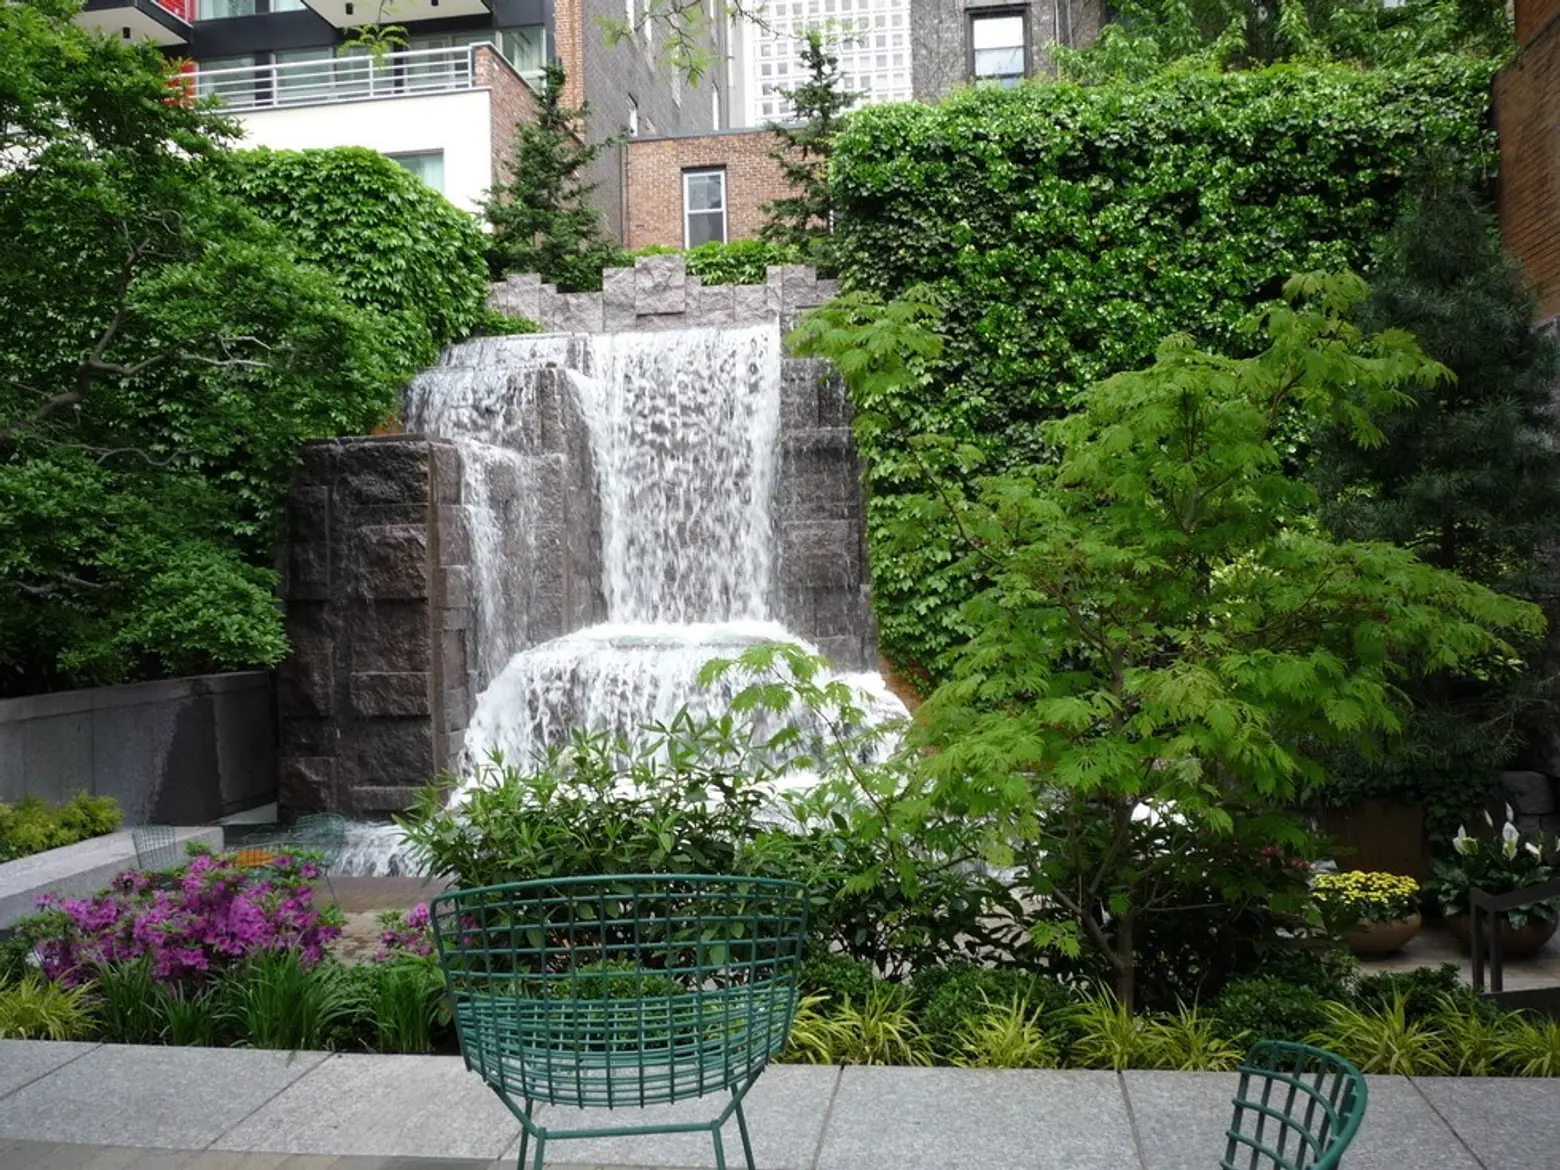 Midtown pocket park with an urban waterfall is designated a National Historic Place